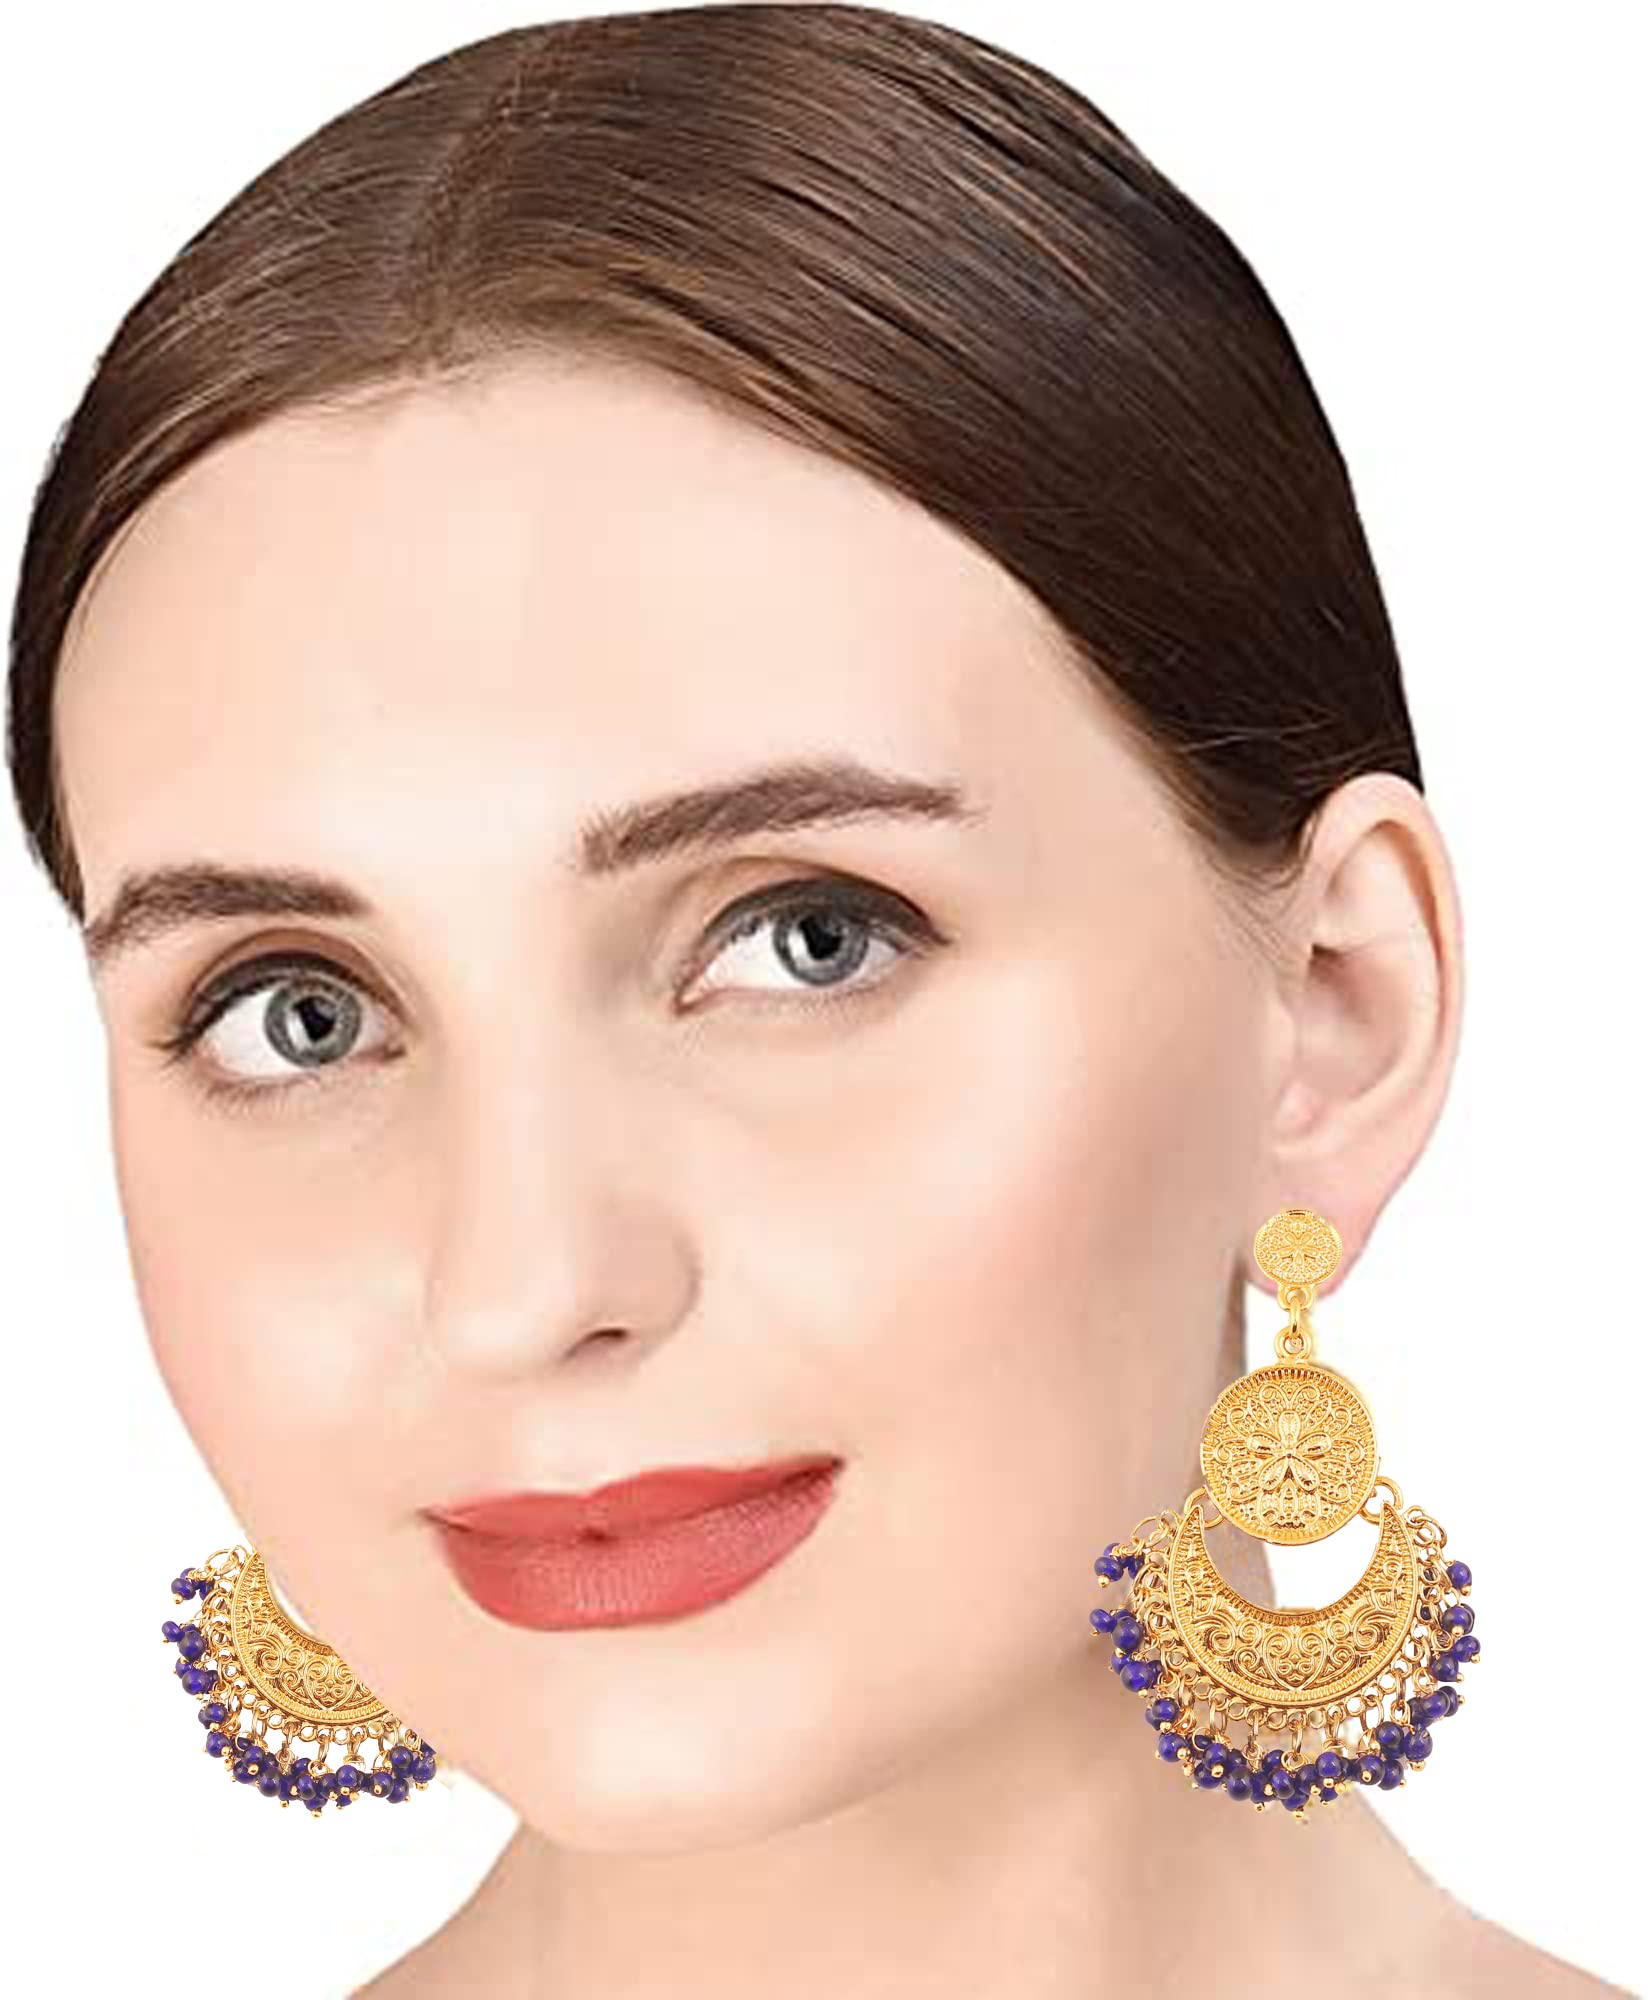 Touchstone Indian Bollywood Gypsy Tribal Boho Crescent Designer Jewelry Chandelier Earrings In Gold Silver Antique Tone For Women.